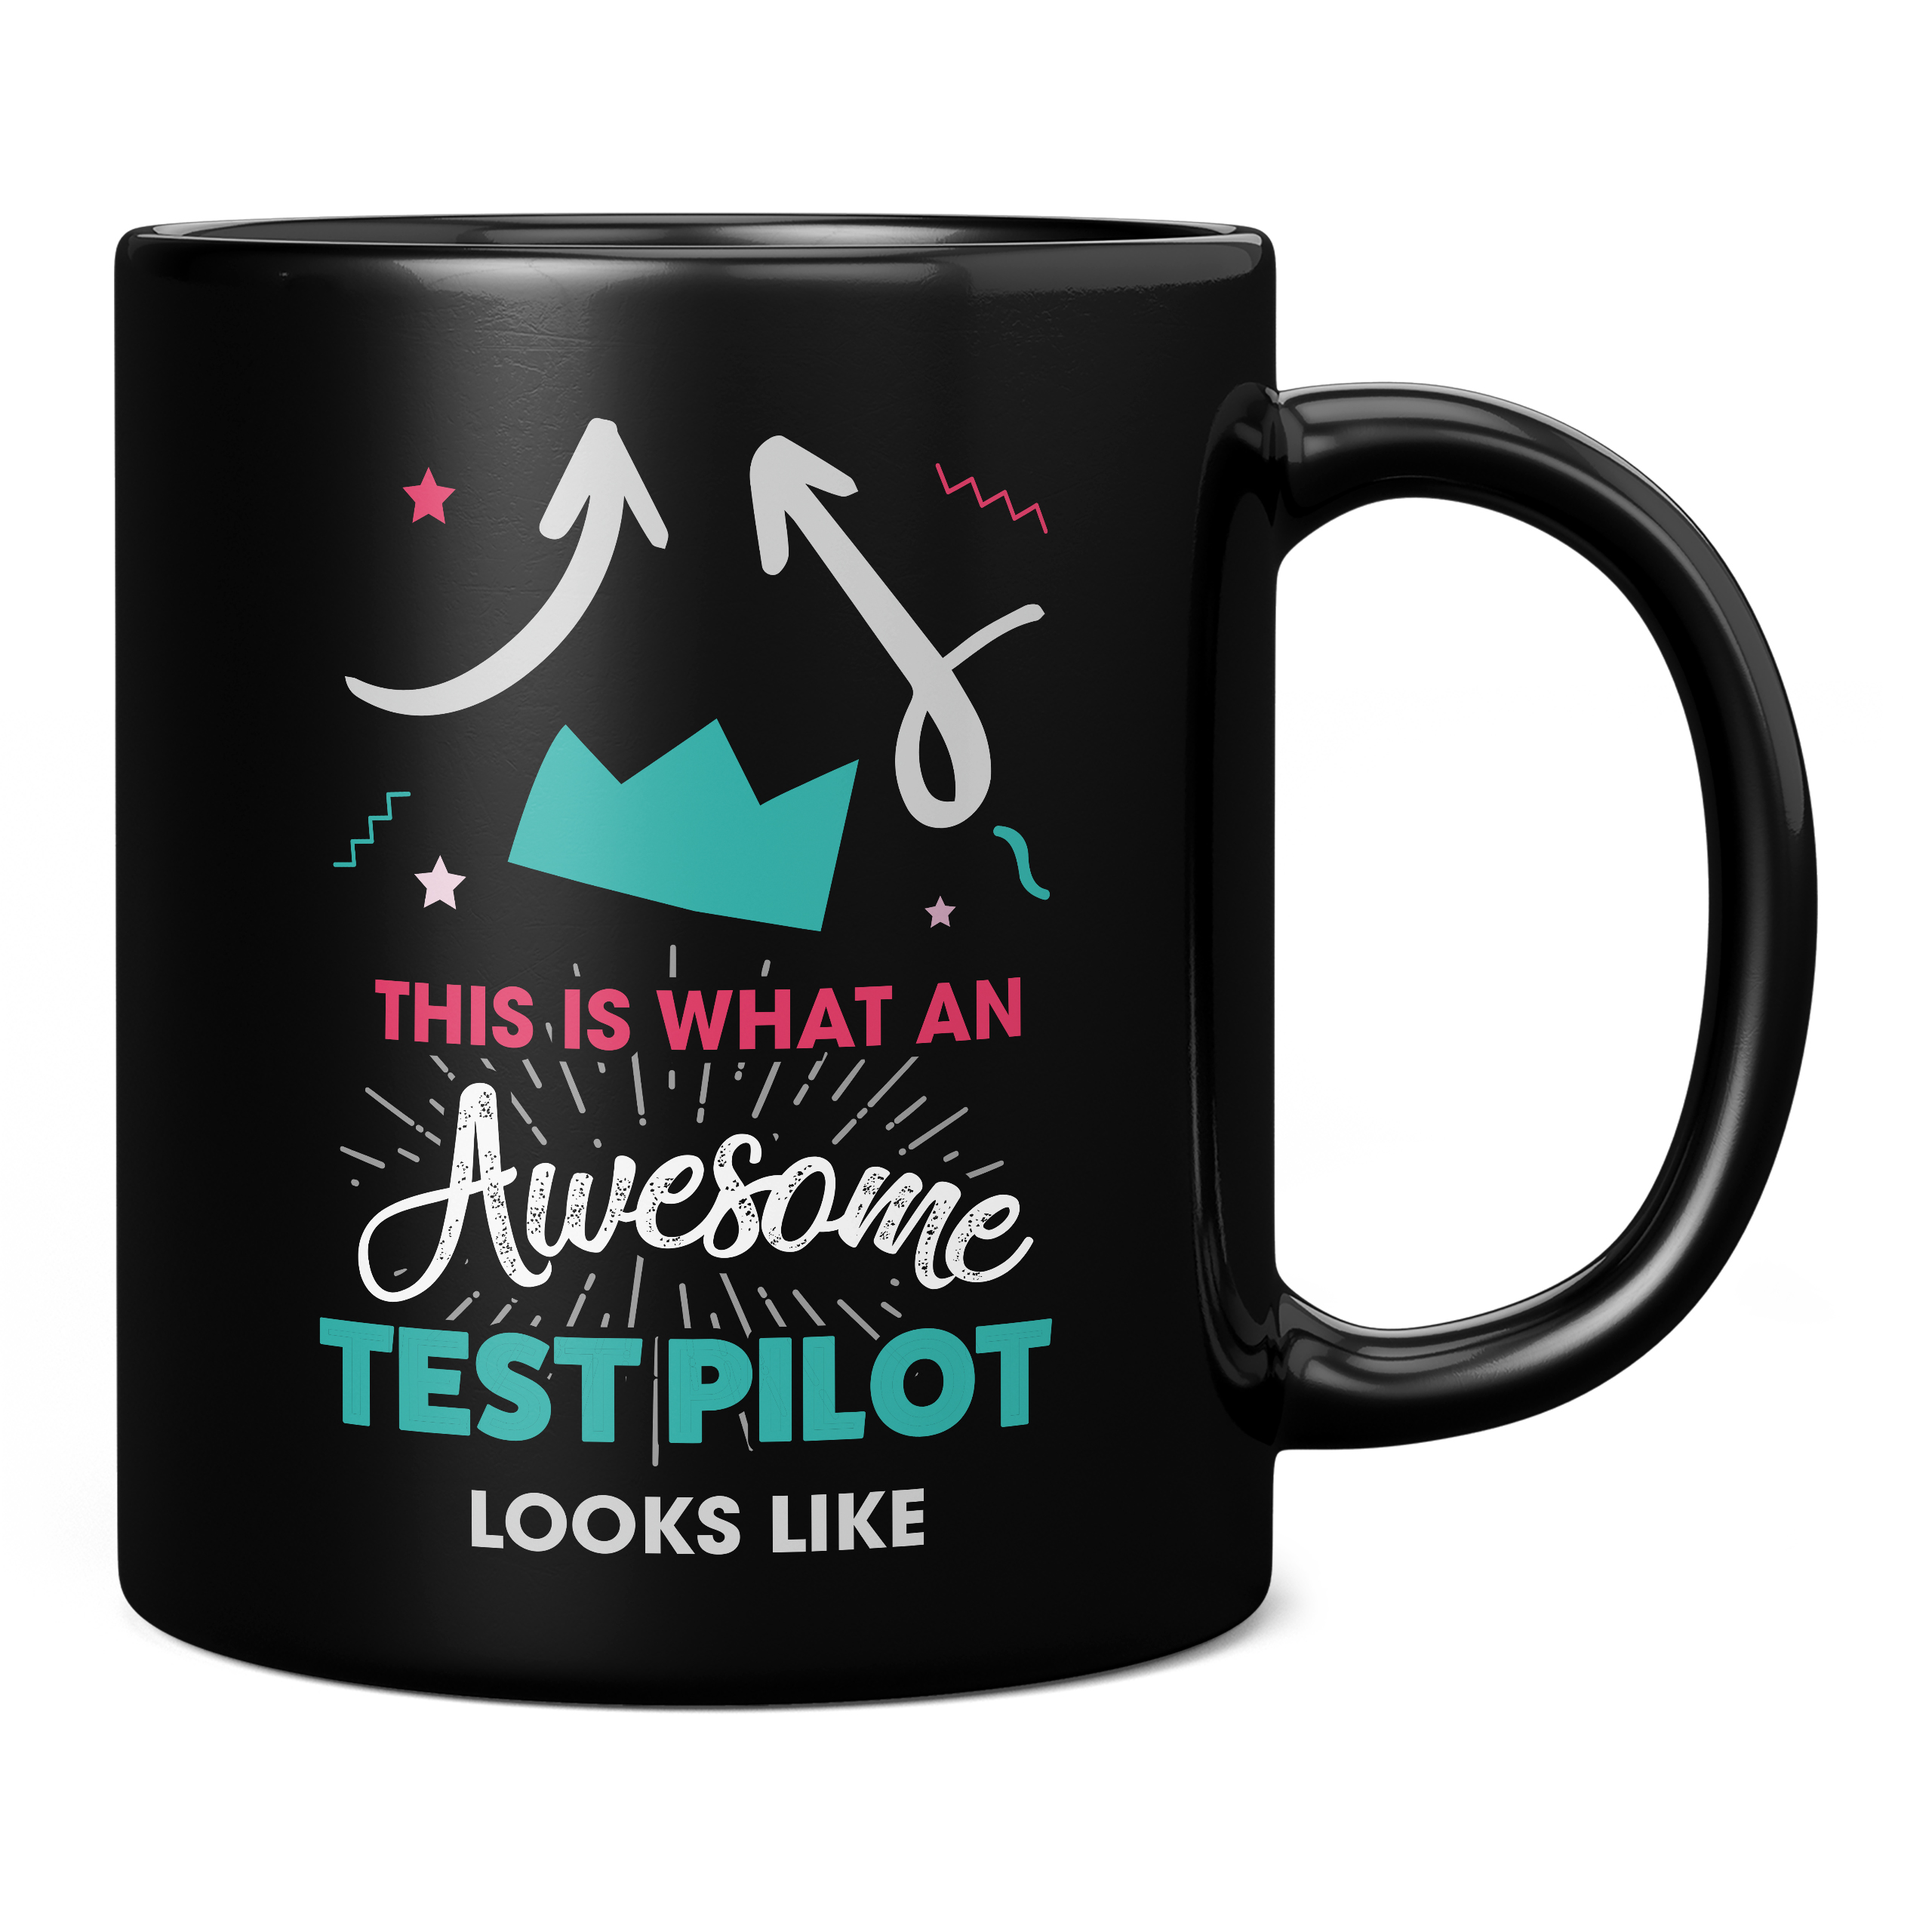 THIS IS WHAT AN AWESOME TEST PILOT LOOKS LIKE 11OZ NOVELTY MUG